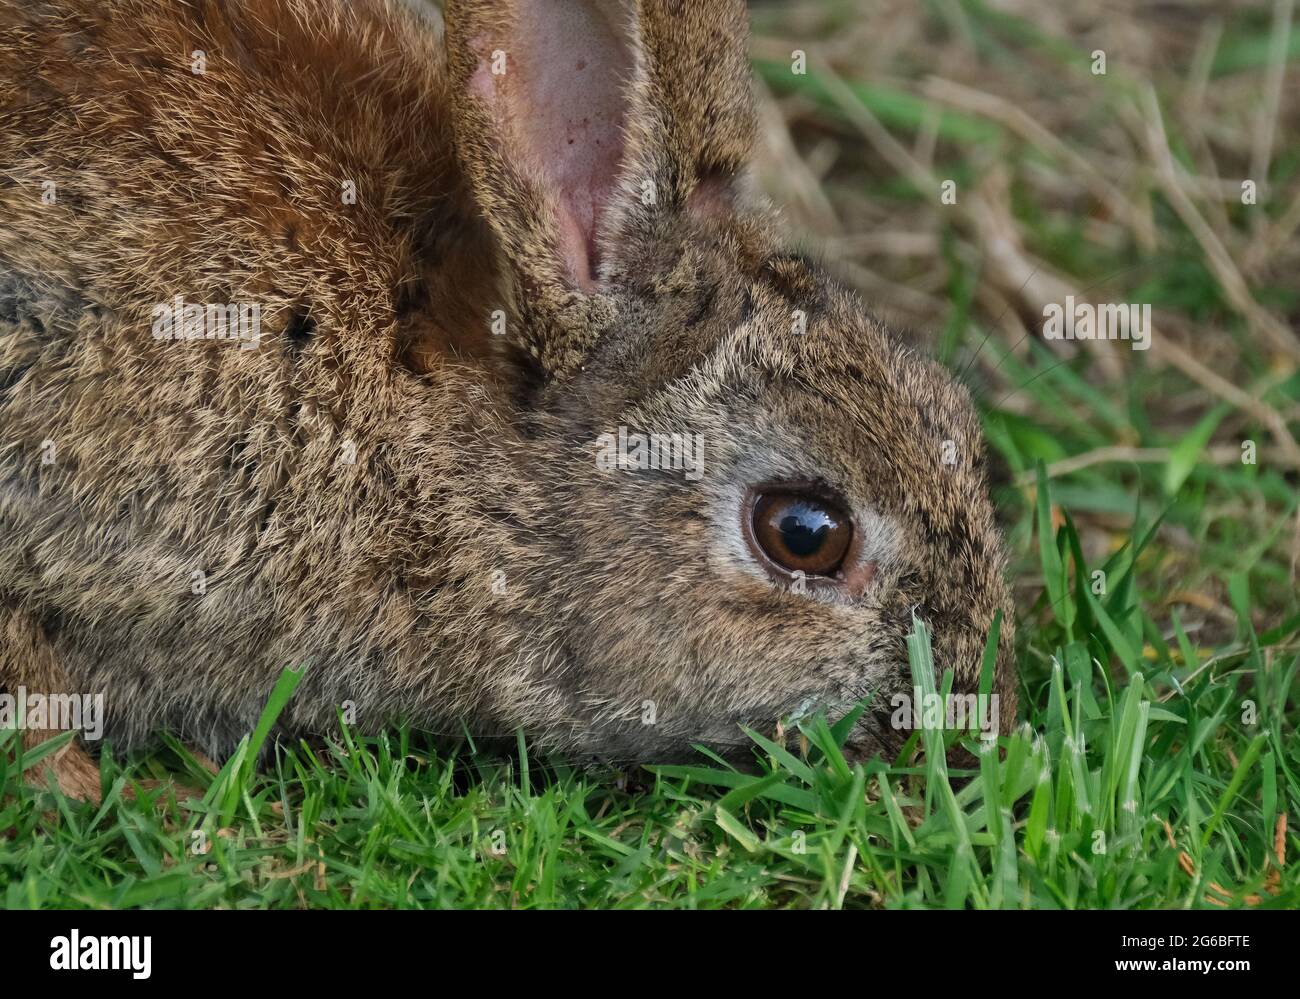 Rabbits are small mammals in the family Leporidae of the order Lagomorpha. Stock Photo